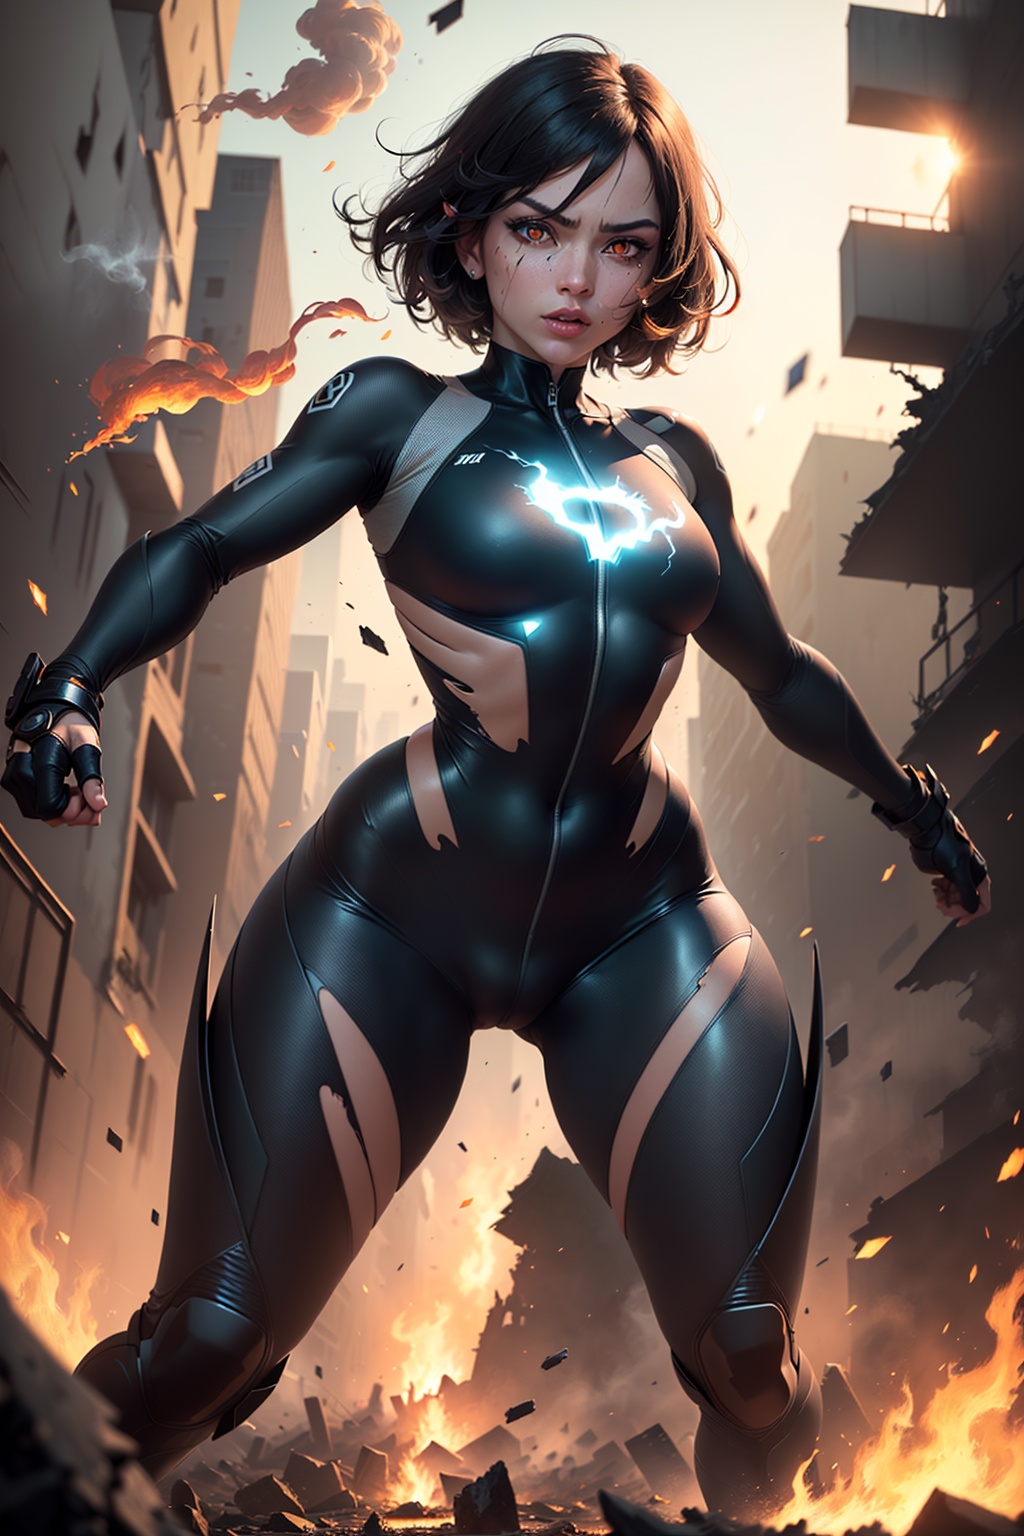 fighting , glowing eyes, short hair,torn tight supersuit, in a destroyed city, smoke and fire, glowing power aura, dynamic pose, dynamic view